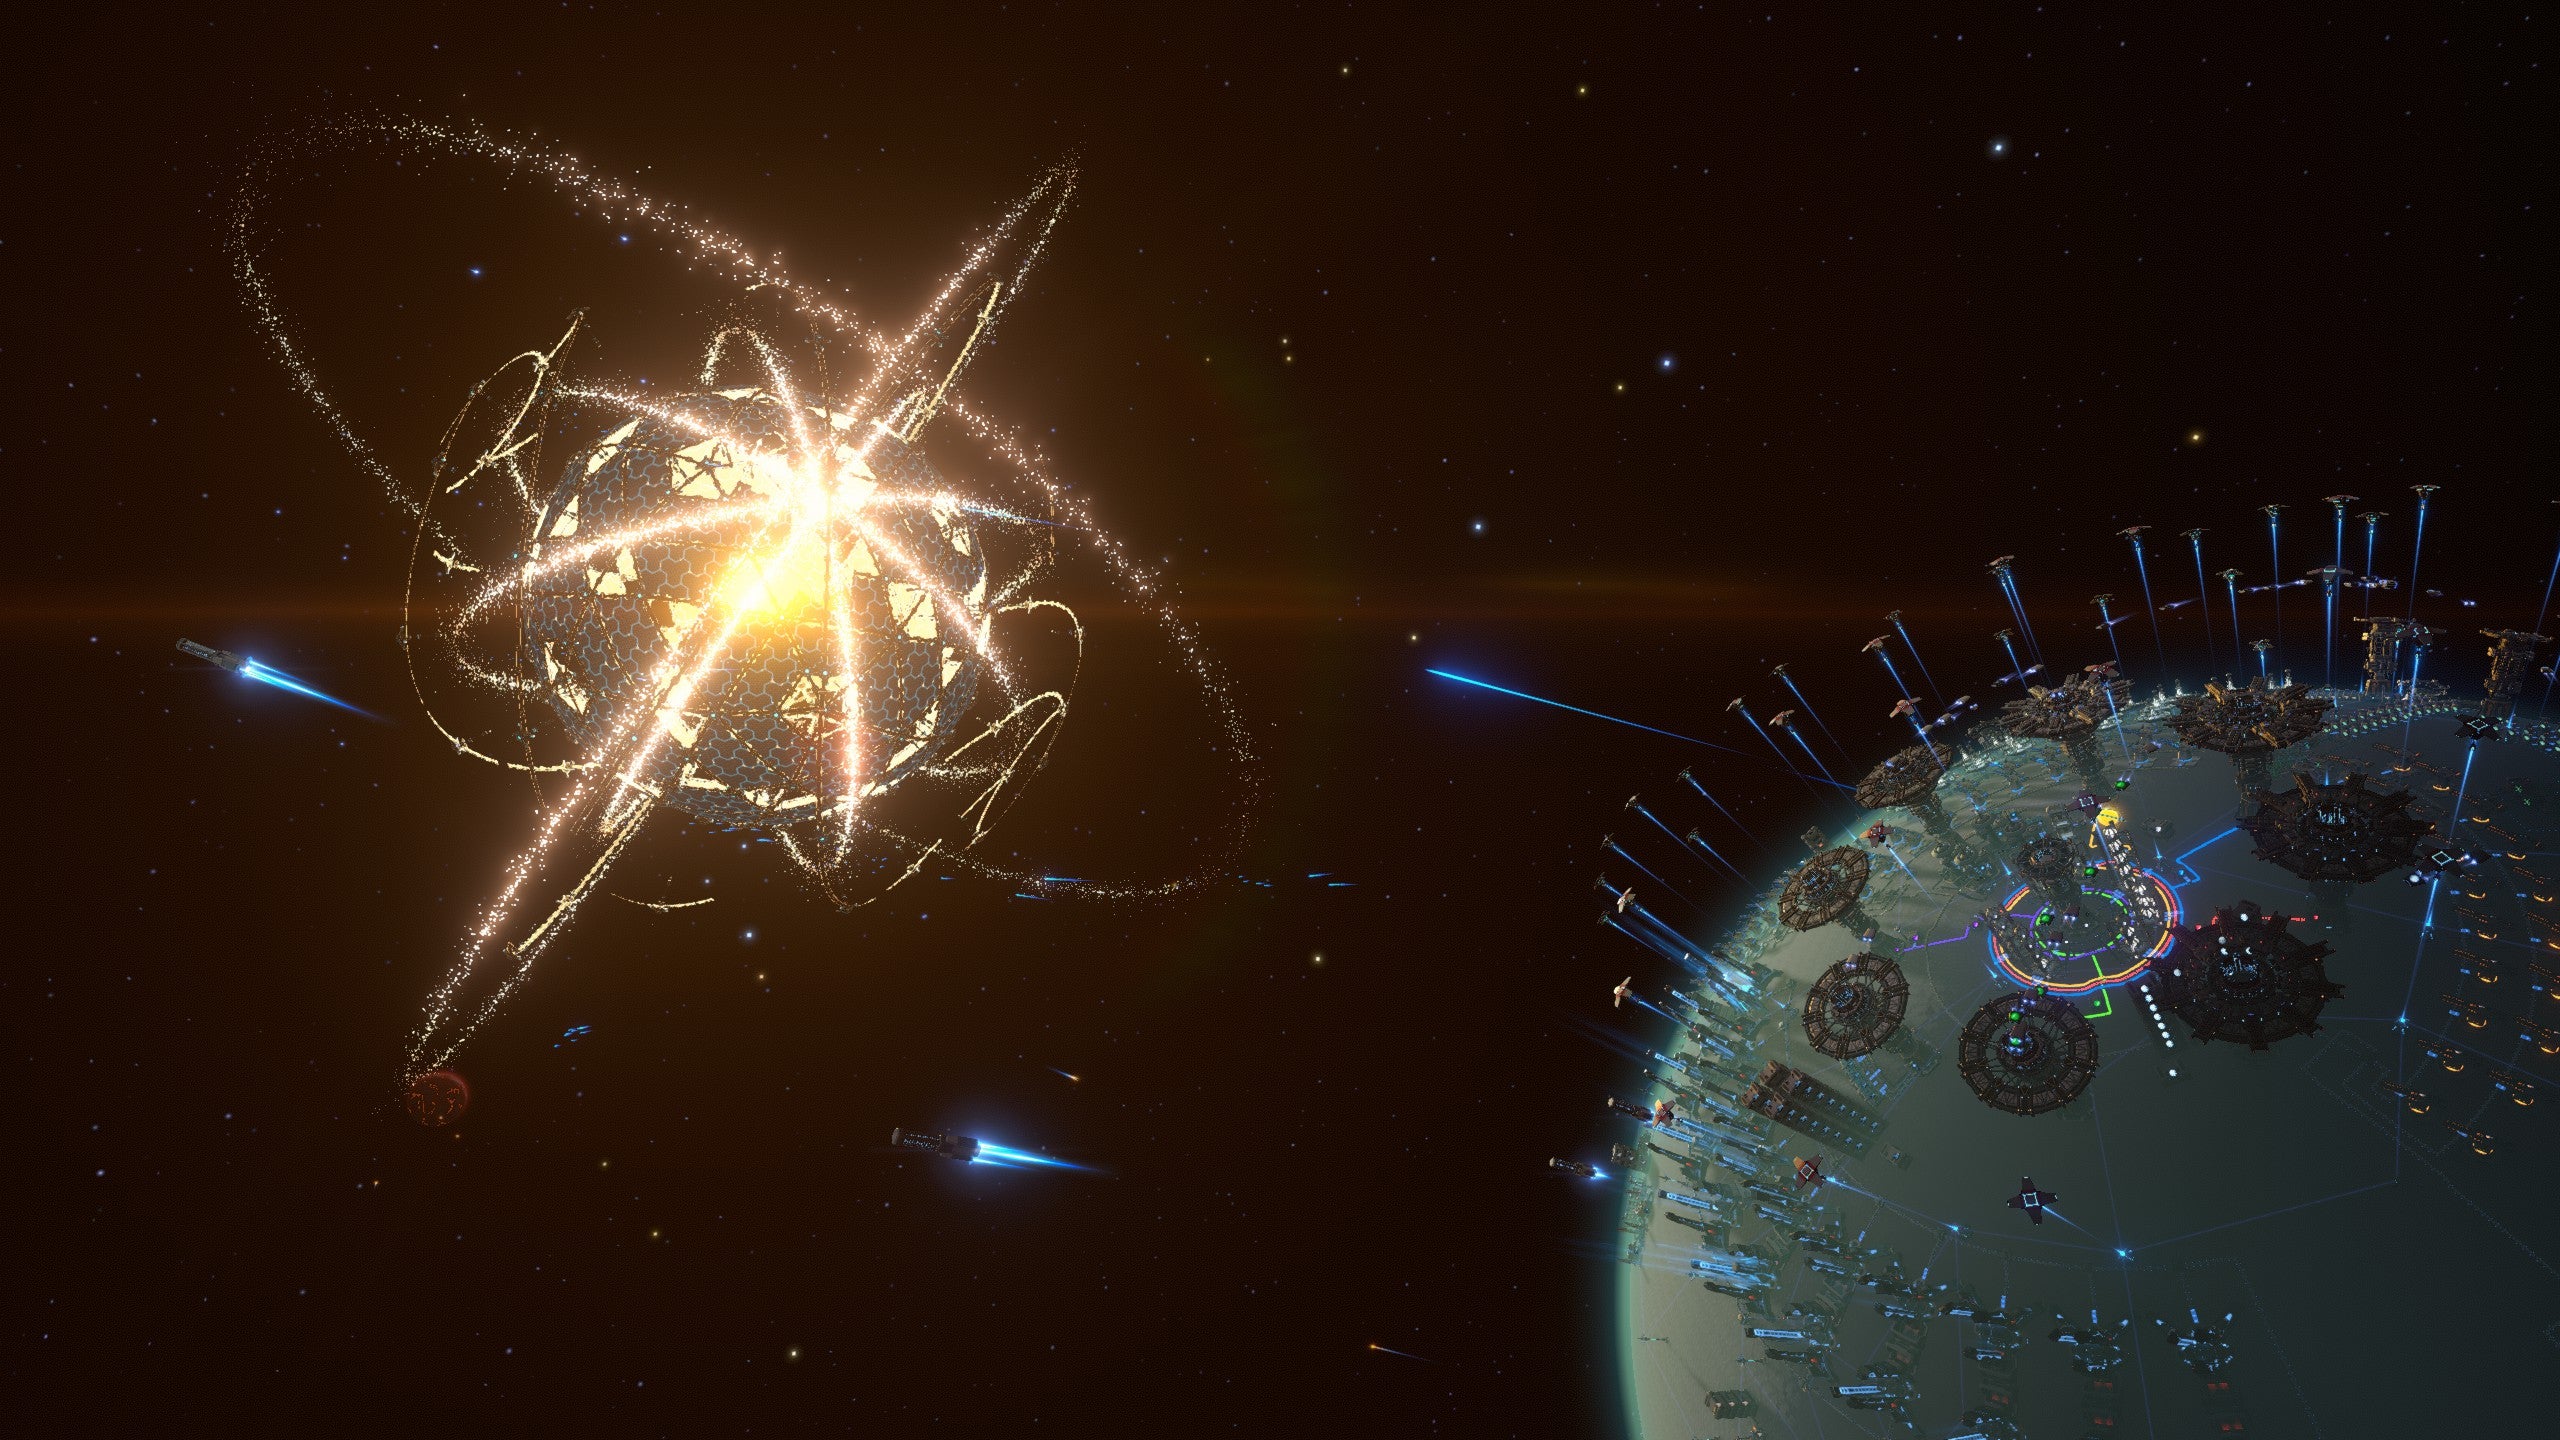 A Dyson Sphere Program screenshot of the beginnings of a Dyson Sphere around a star, with a planet in the foreground sporting a science factory at one of its poles.